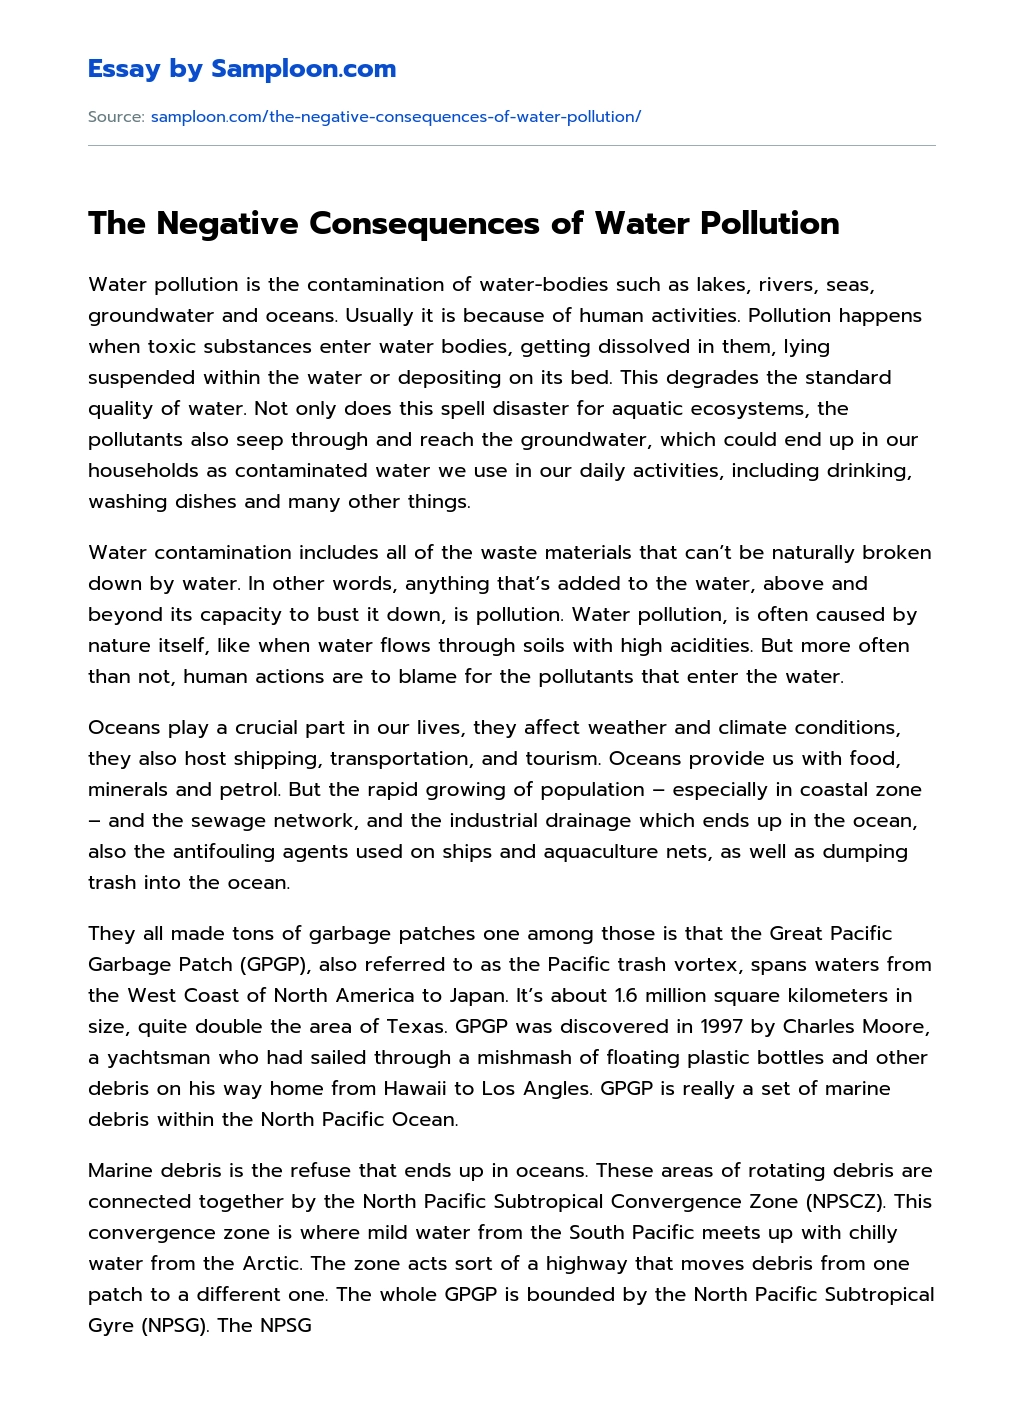 The Negative Consequences of Water Pollution essay